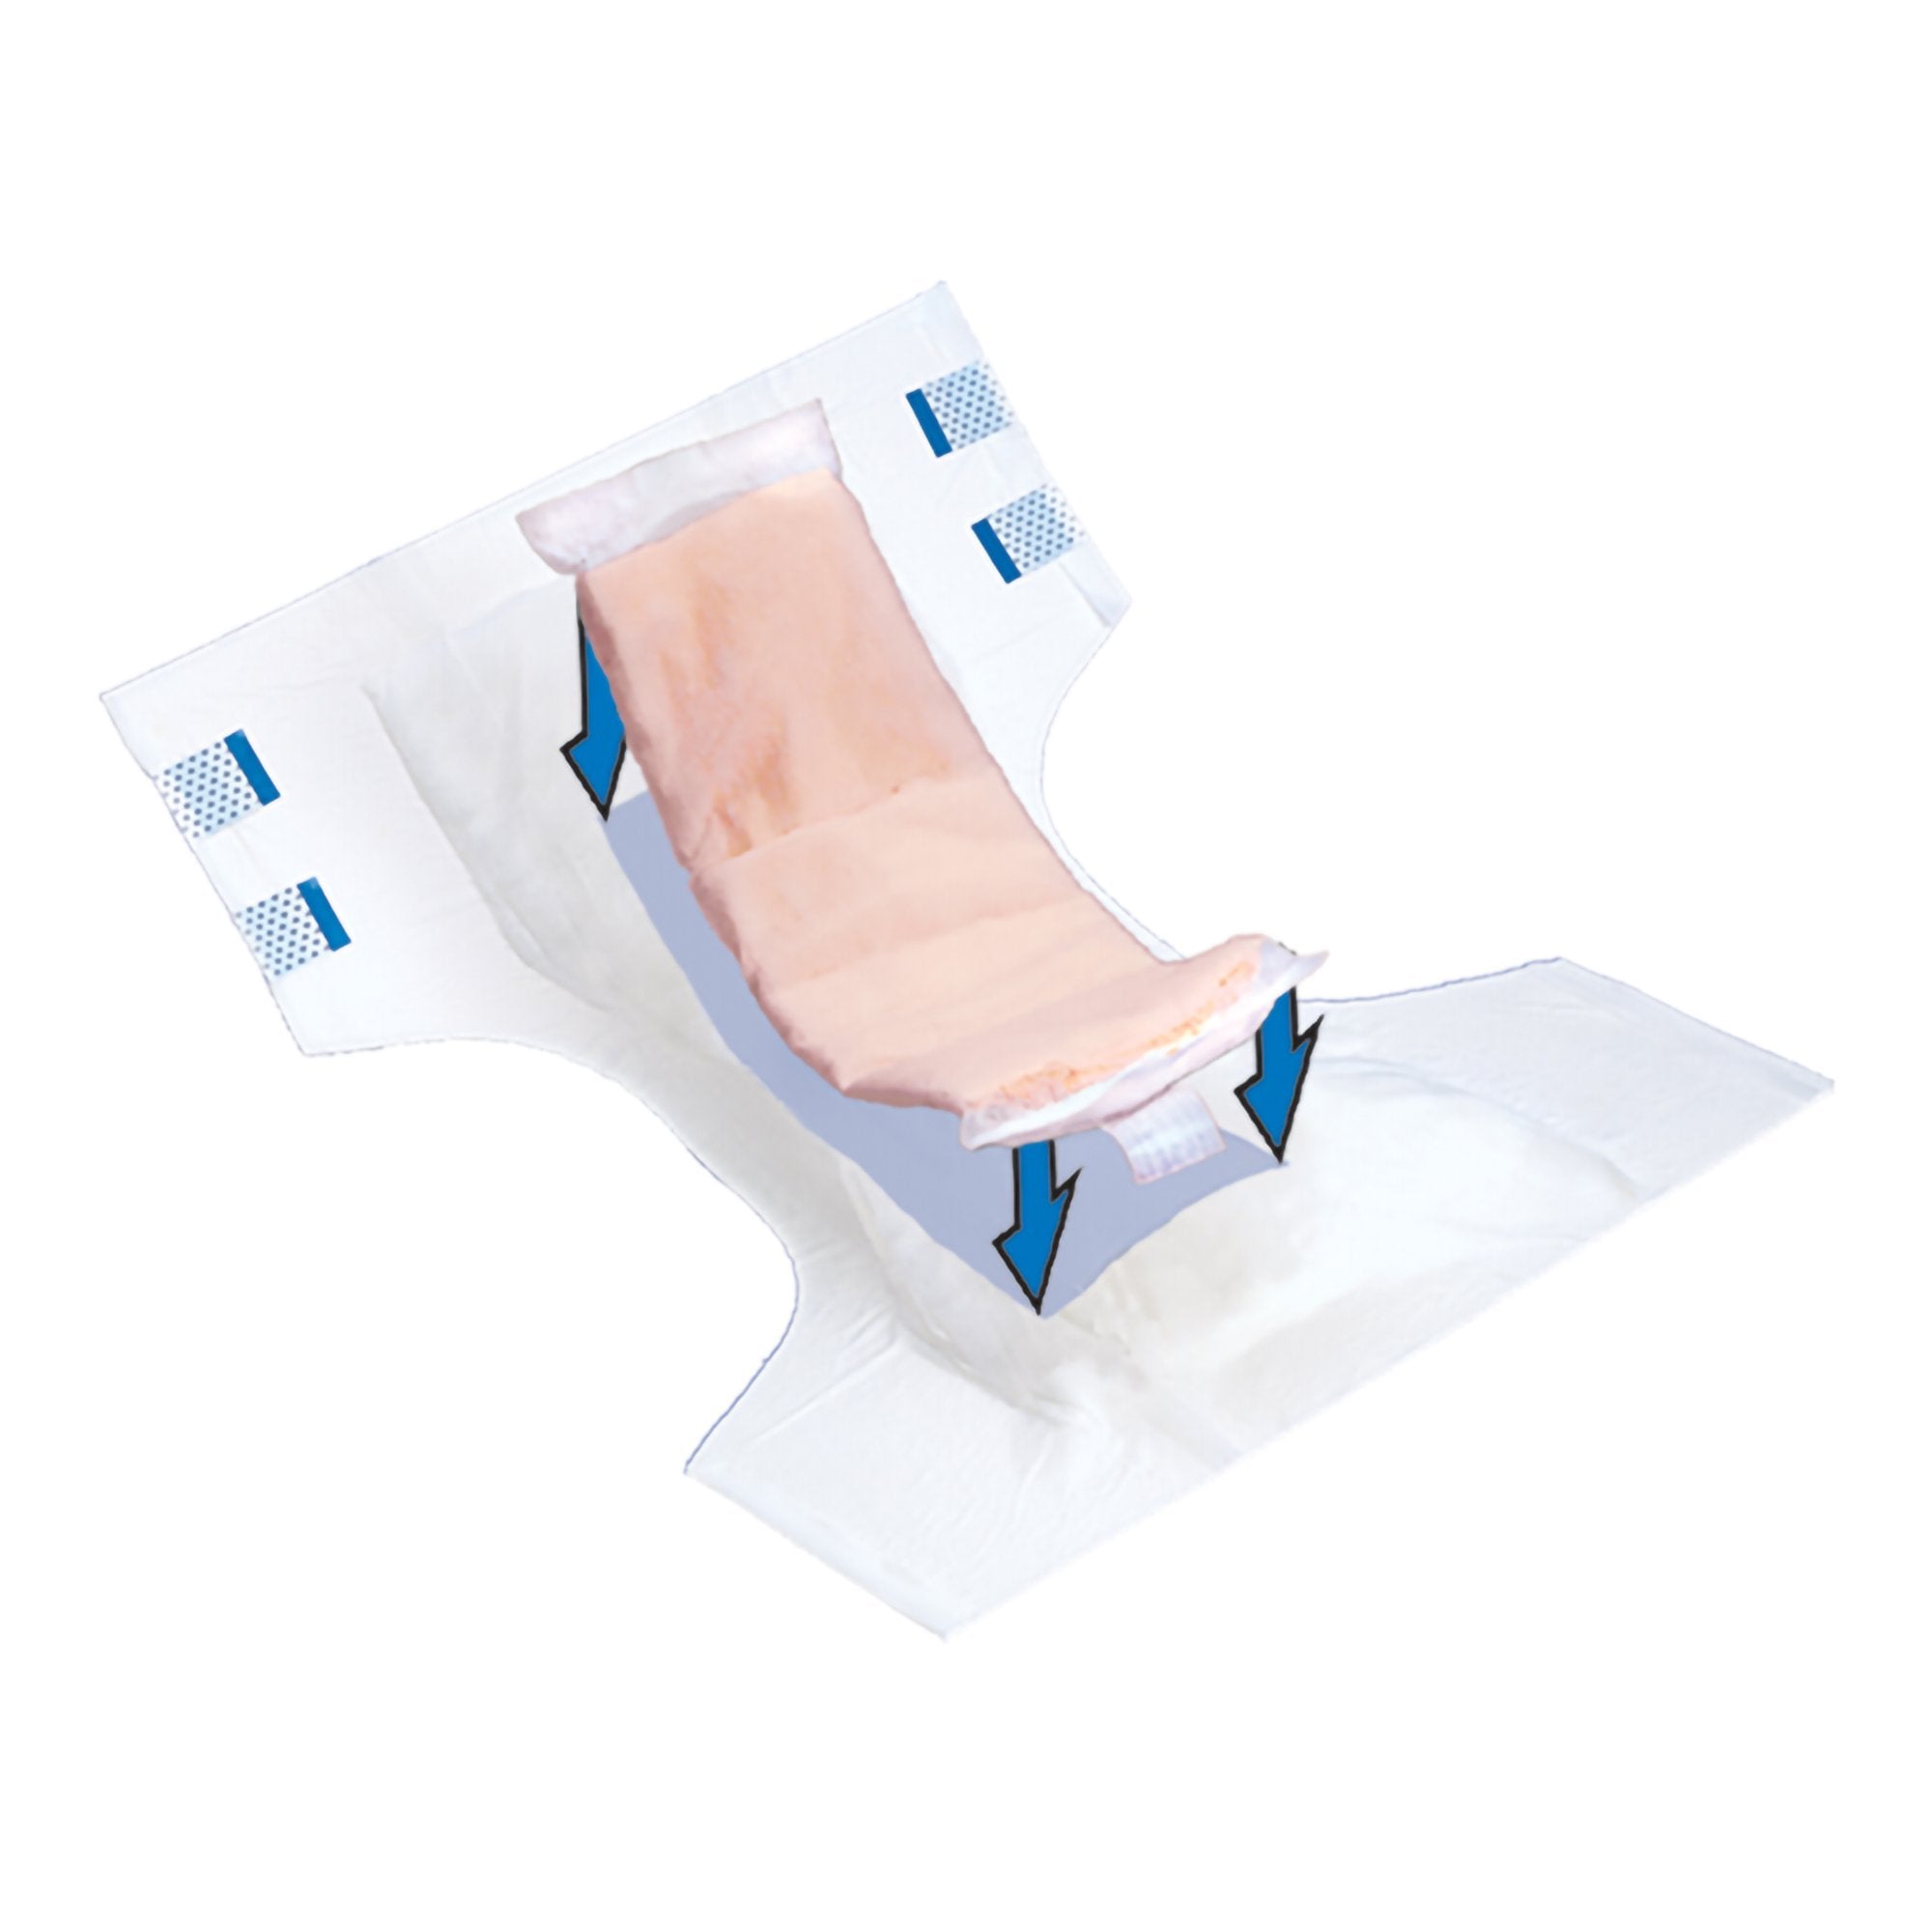 Booster Pad Tranquility® TopLiner™ 2-3/4 X 10-1/2 Inch Heavy Absorbency Superabsorbant Core Mini